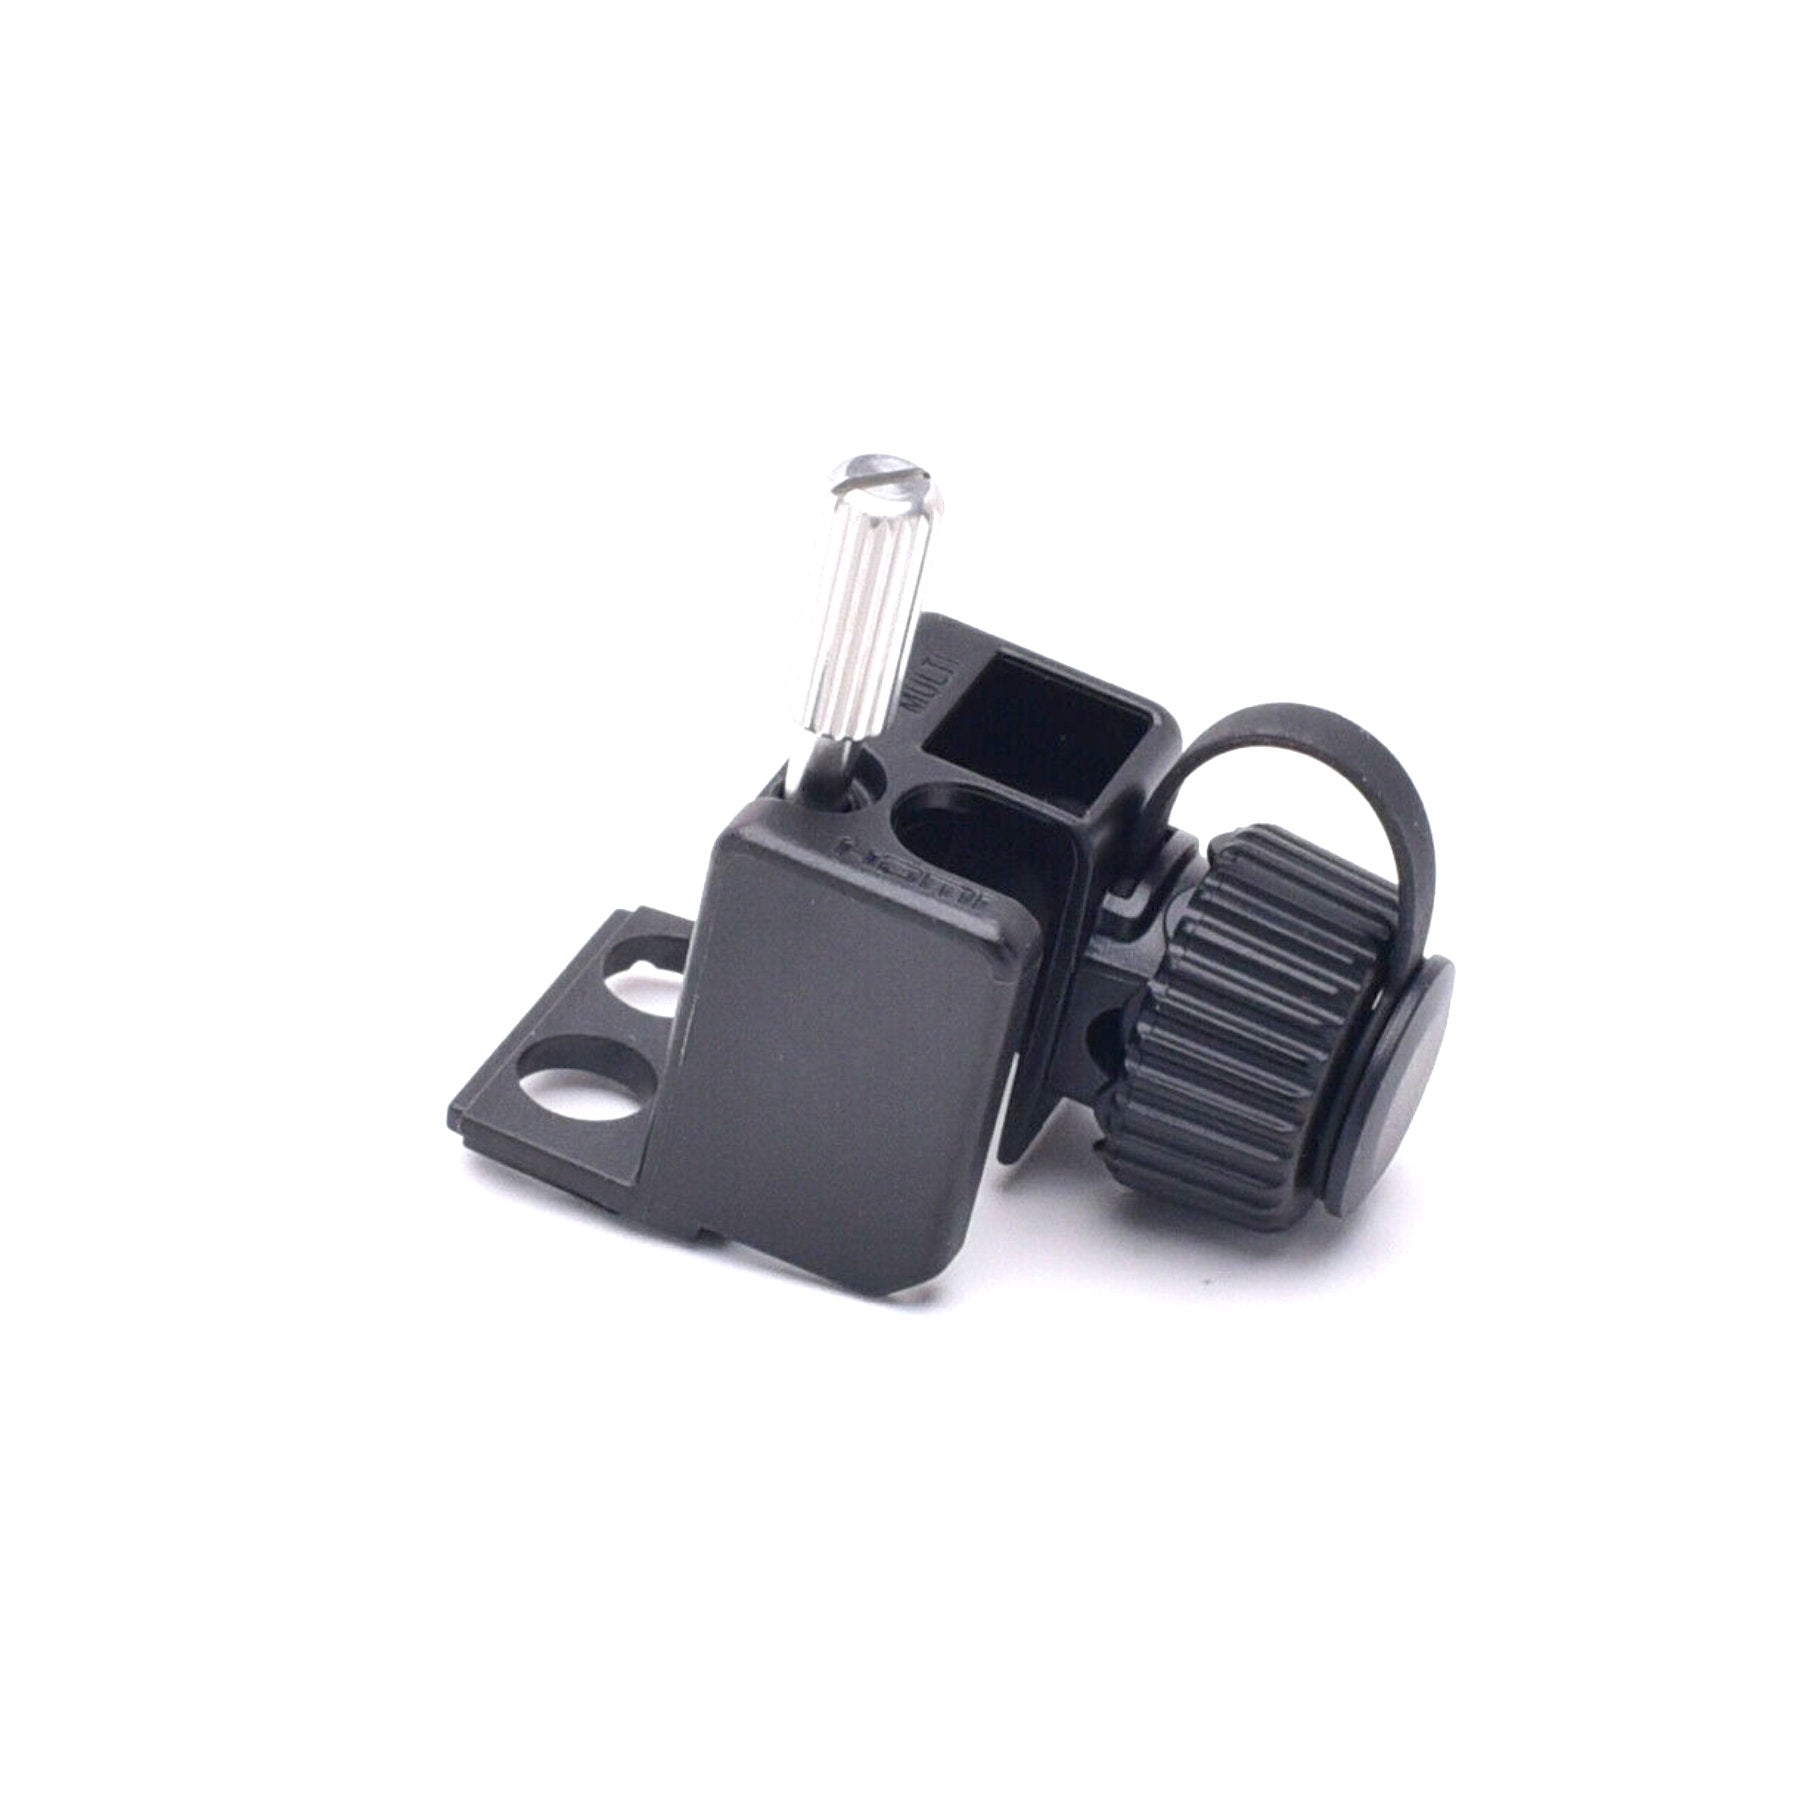 Buy Cable Protector for Sony A7s MKii at Topic Store